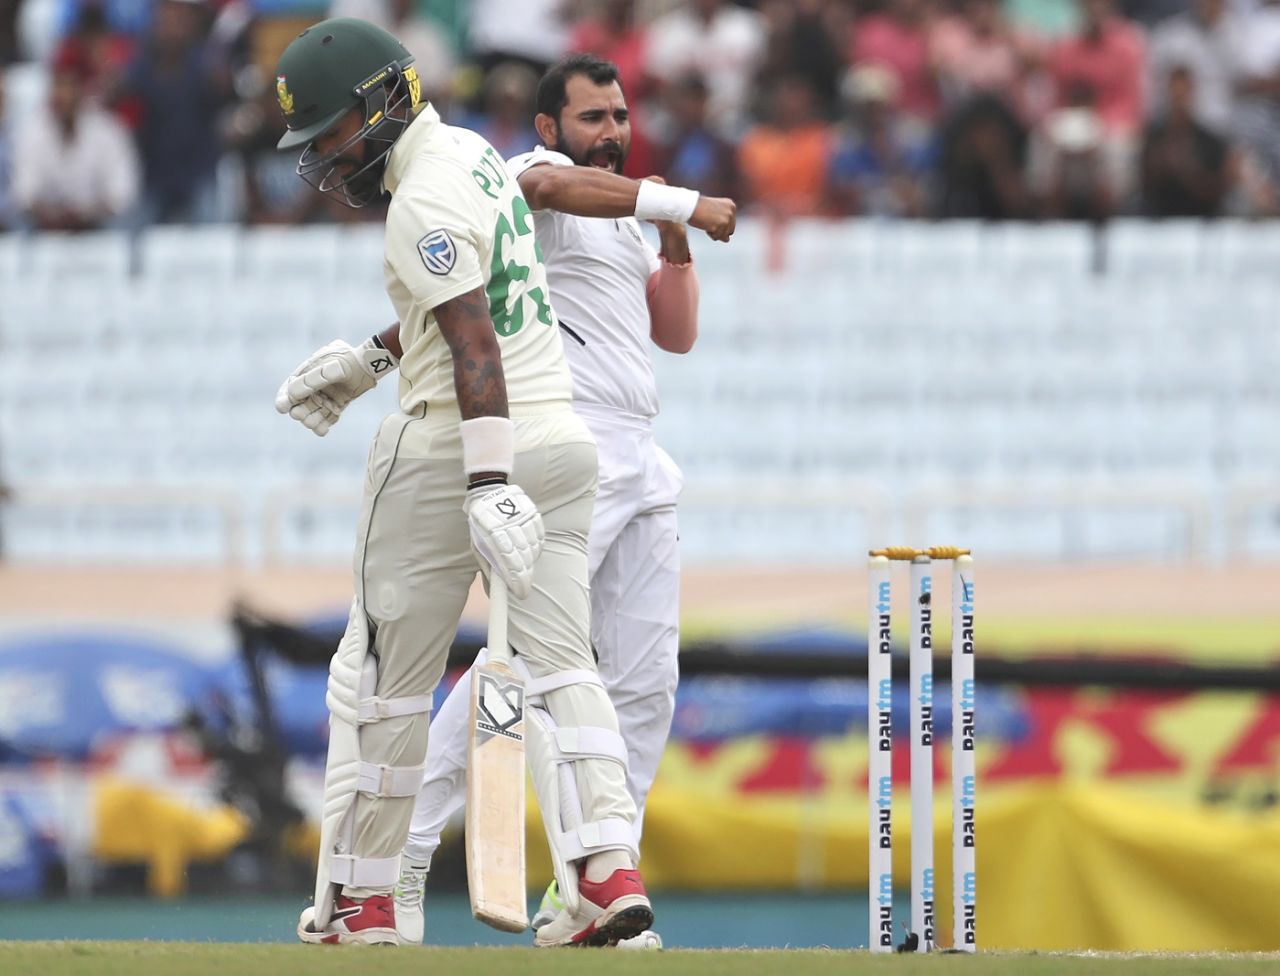 Mohammed Shami reacts after pinning Dane Piedt in front of the stumps, India v South Africa, 3rd Test, Ranchi, 3rd day, October 21, 2019